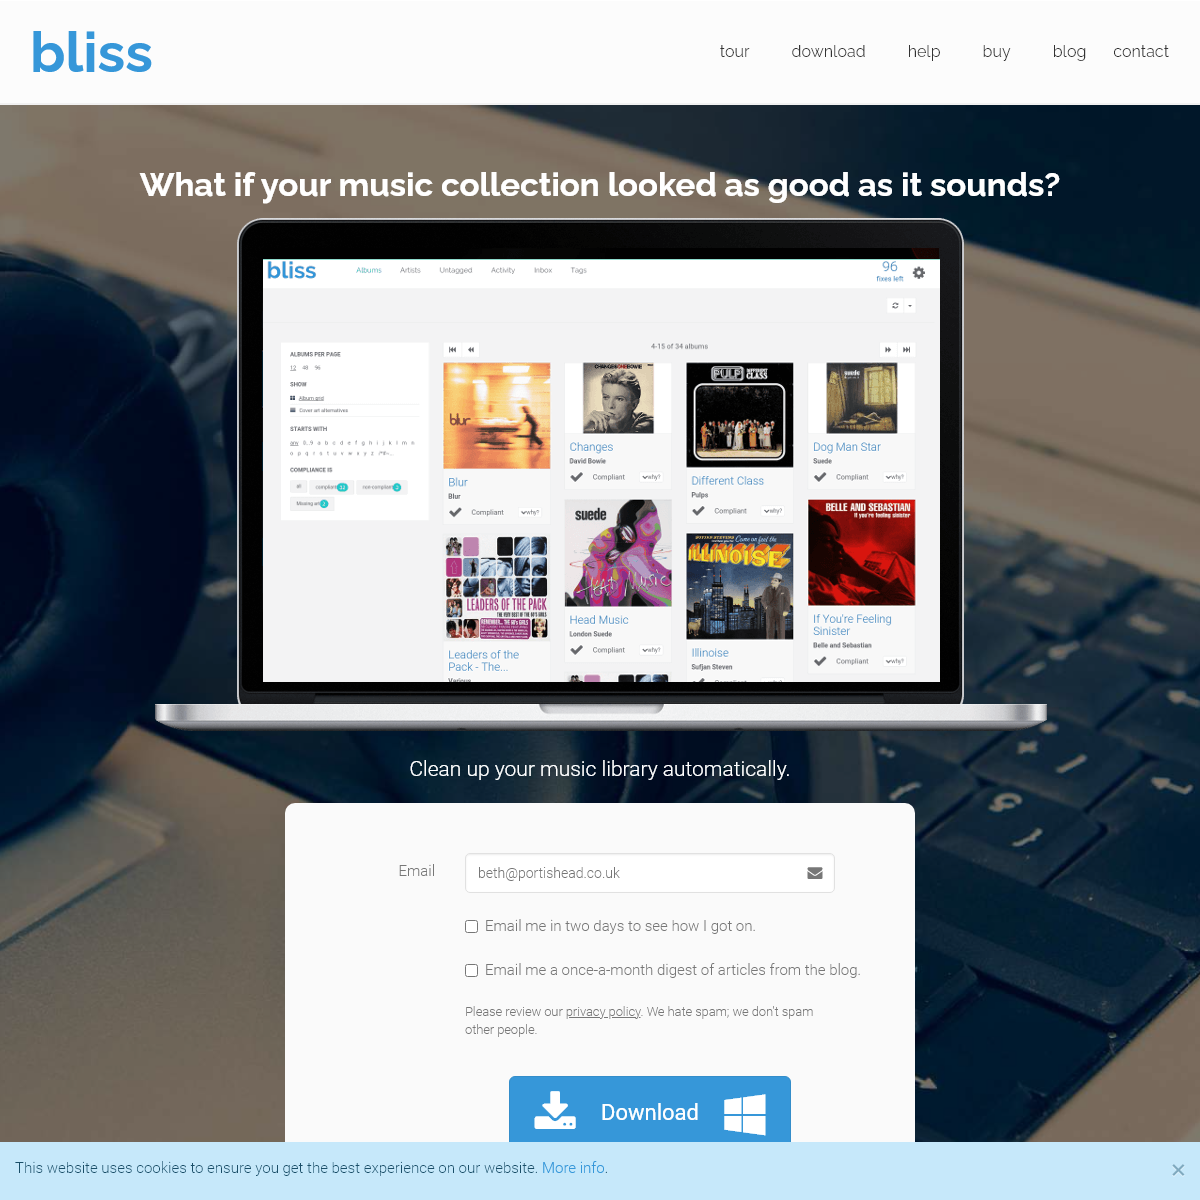 A complete backup of blisshq.com